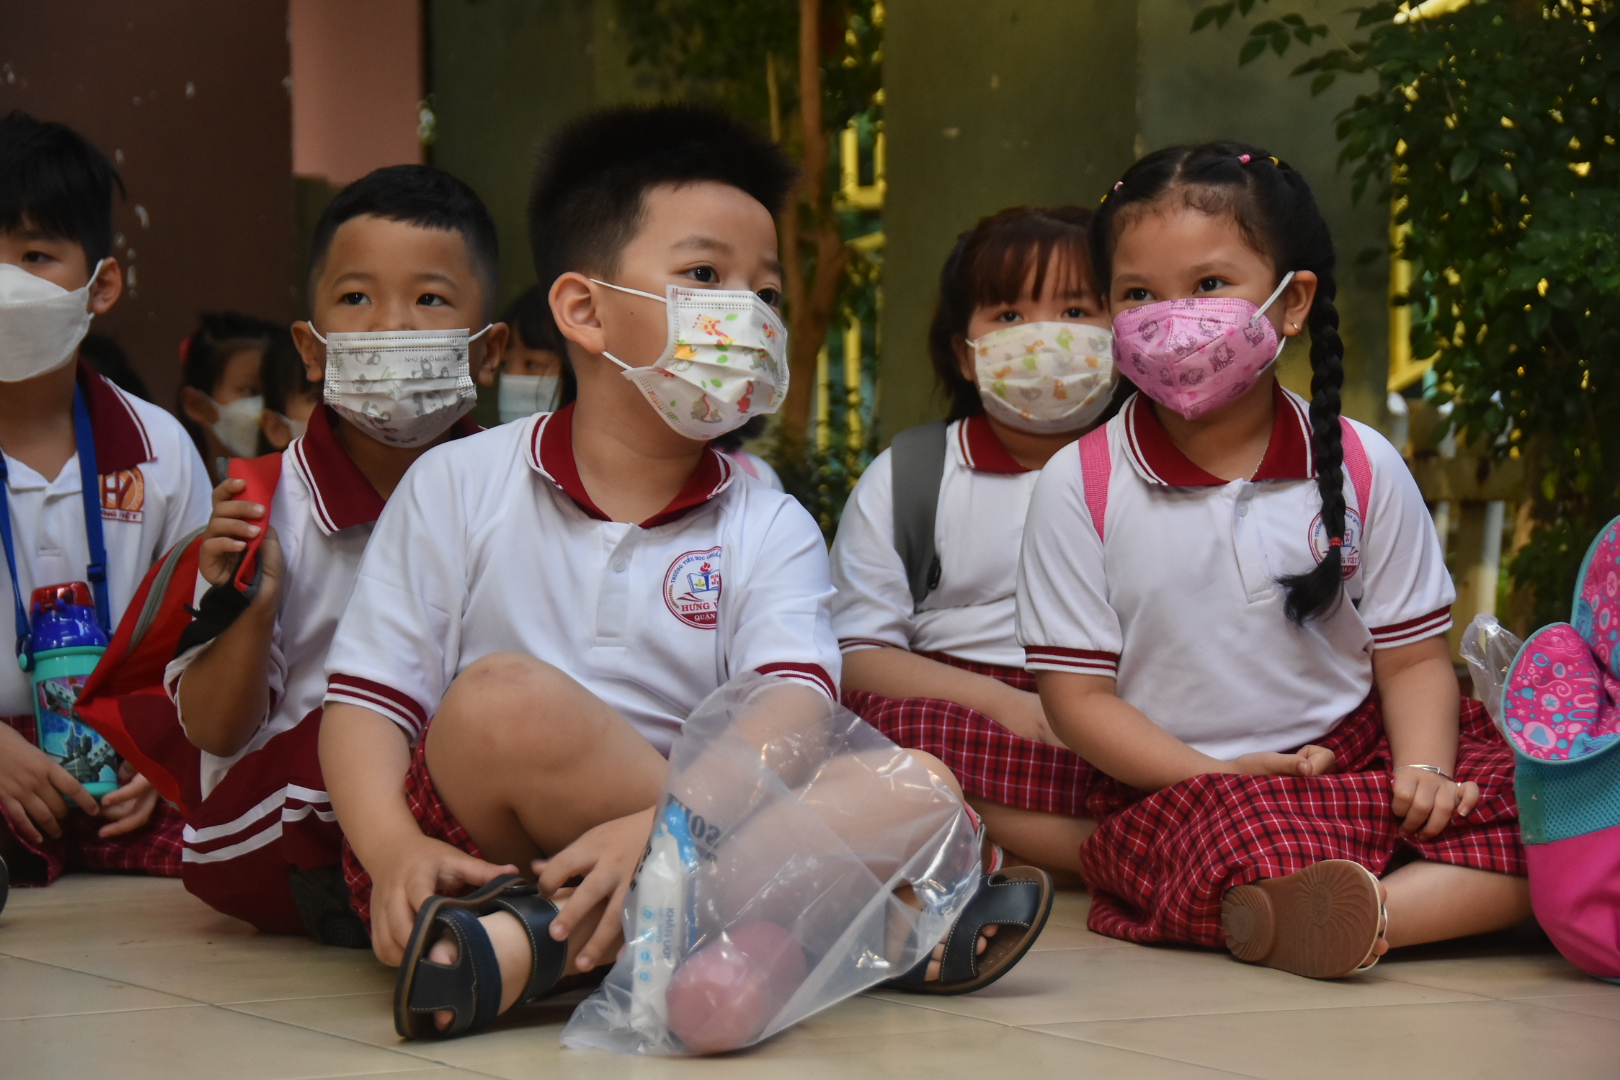 Plan to vaccinate against Covid-19 for 898,537 children from 5 to under 12 years old in Ho Chi Minh City - Photo 1.